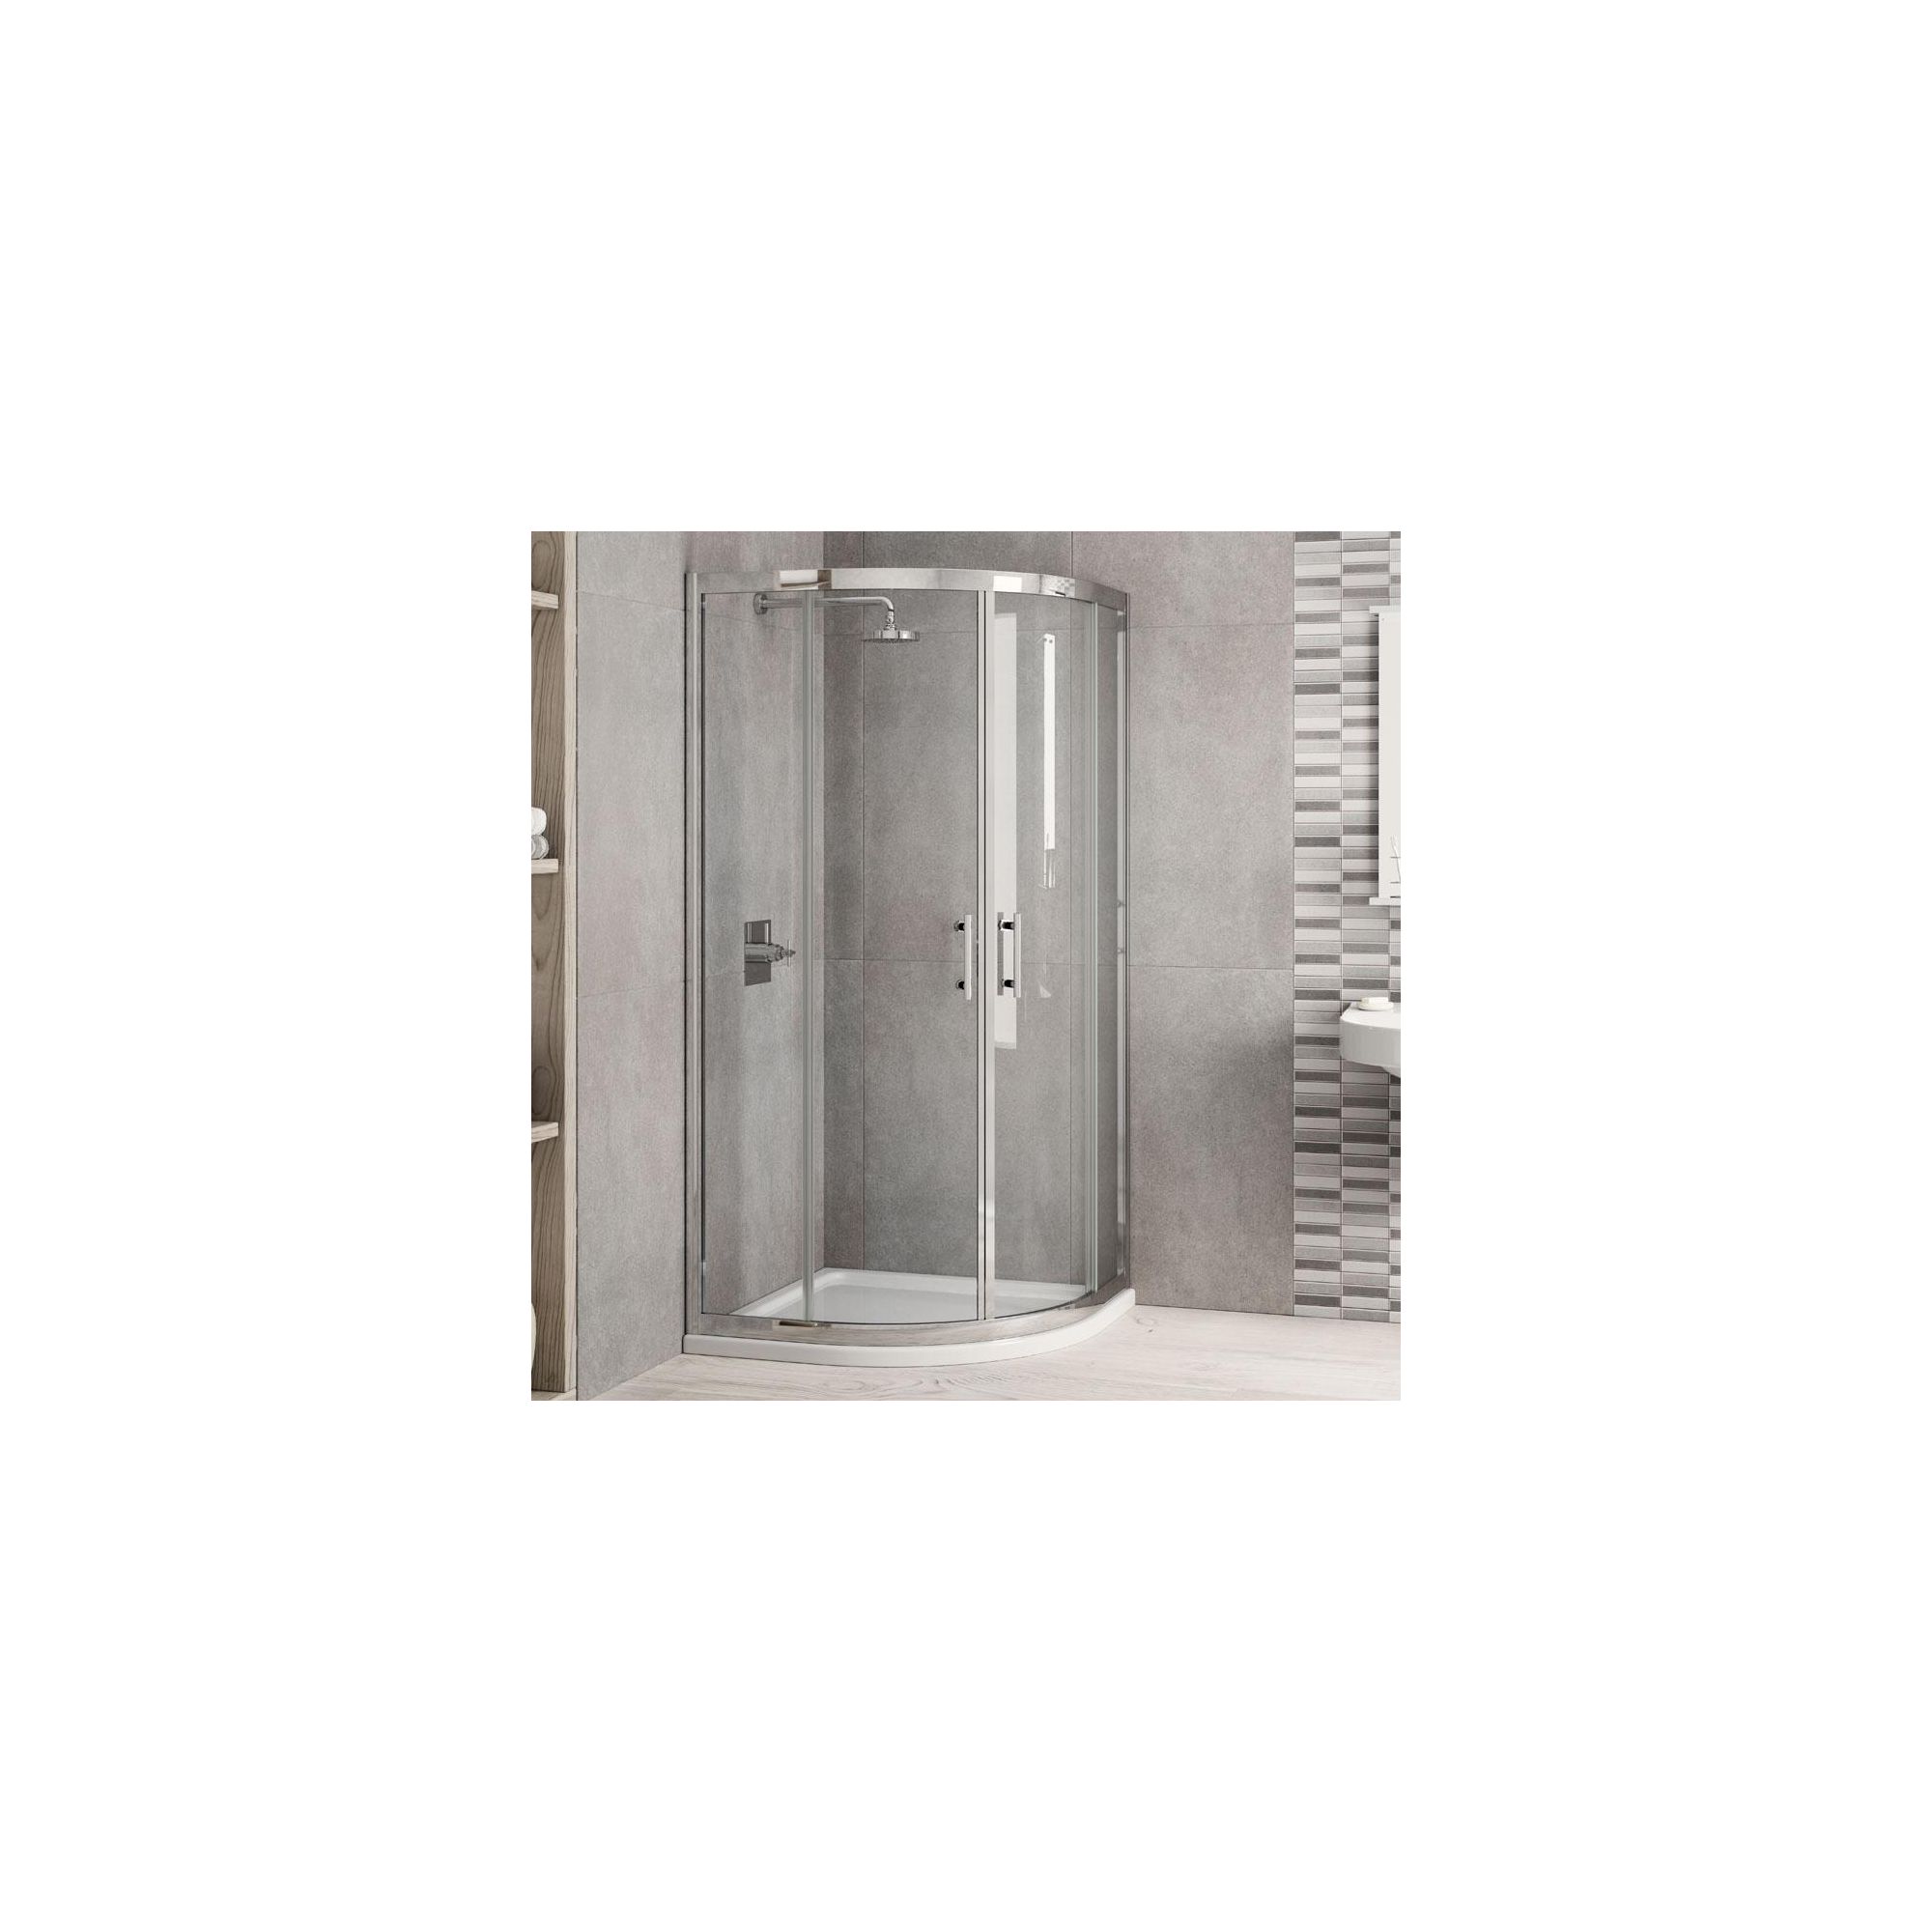 Elemis Inspire Two-Door Quadrant Shower Enclosure, 800mm x 800mm, 6mm Glass, Low Profile Tray at Tesco Direct